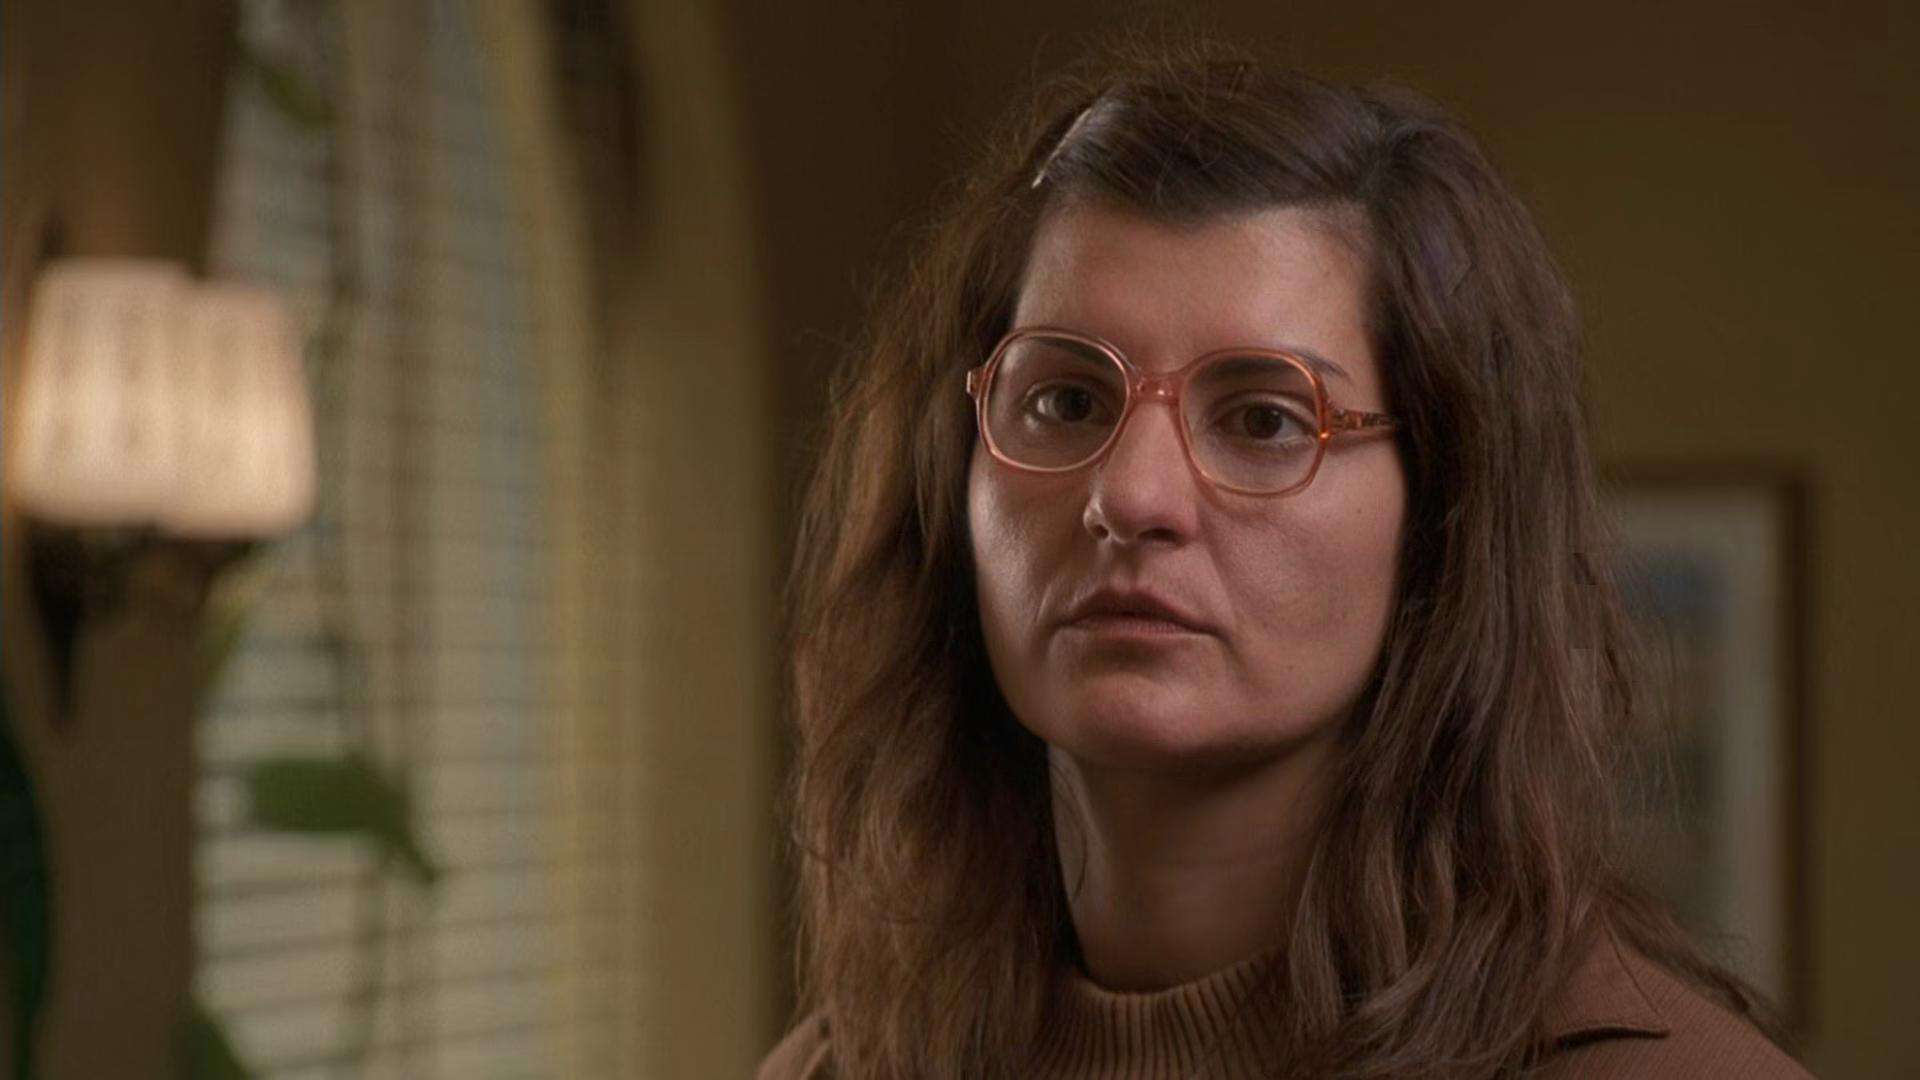 A woman in glasses stares at something off-screen in this image from Gold Circle Films.